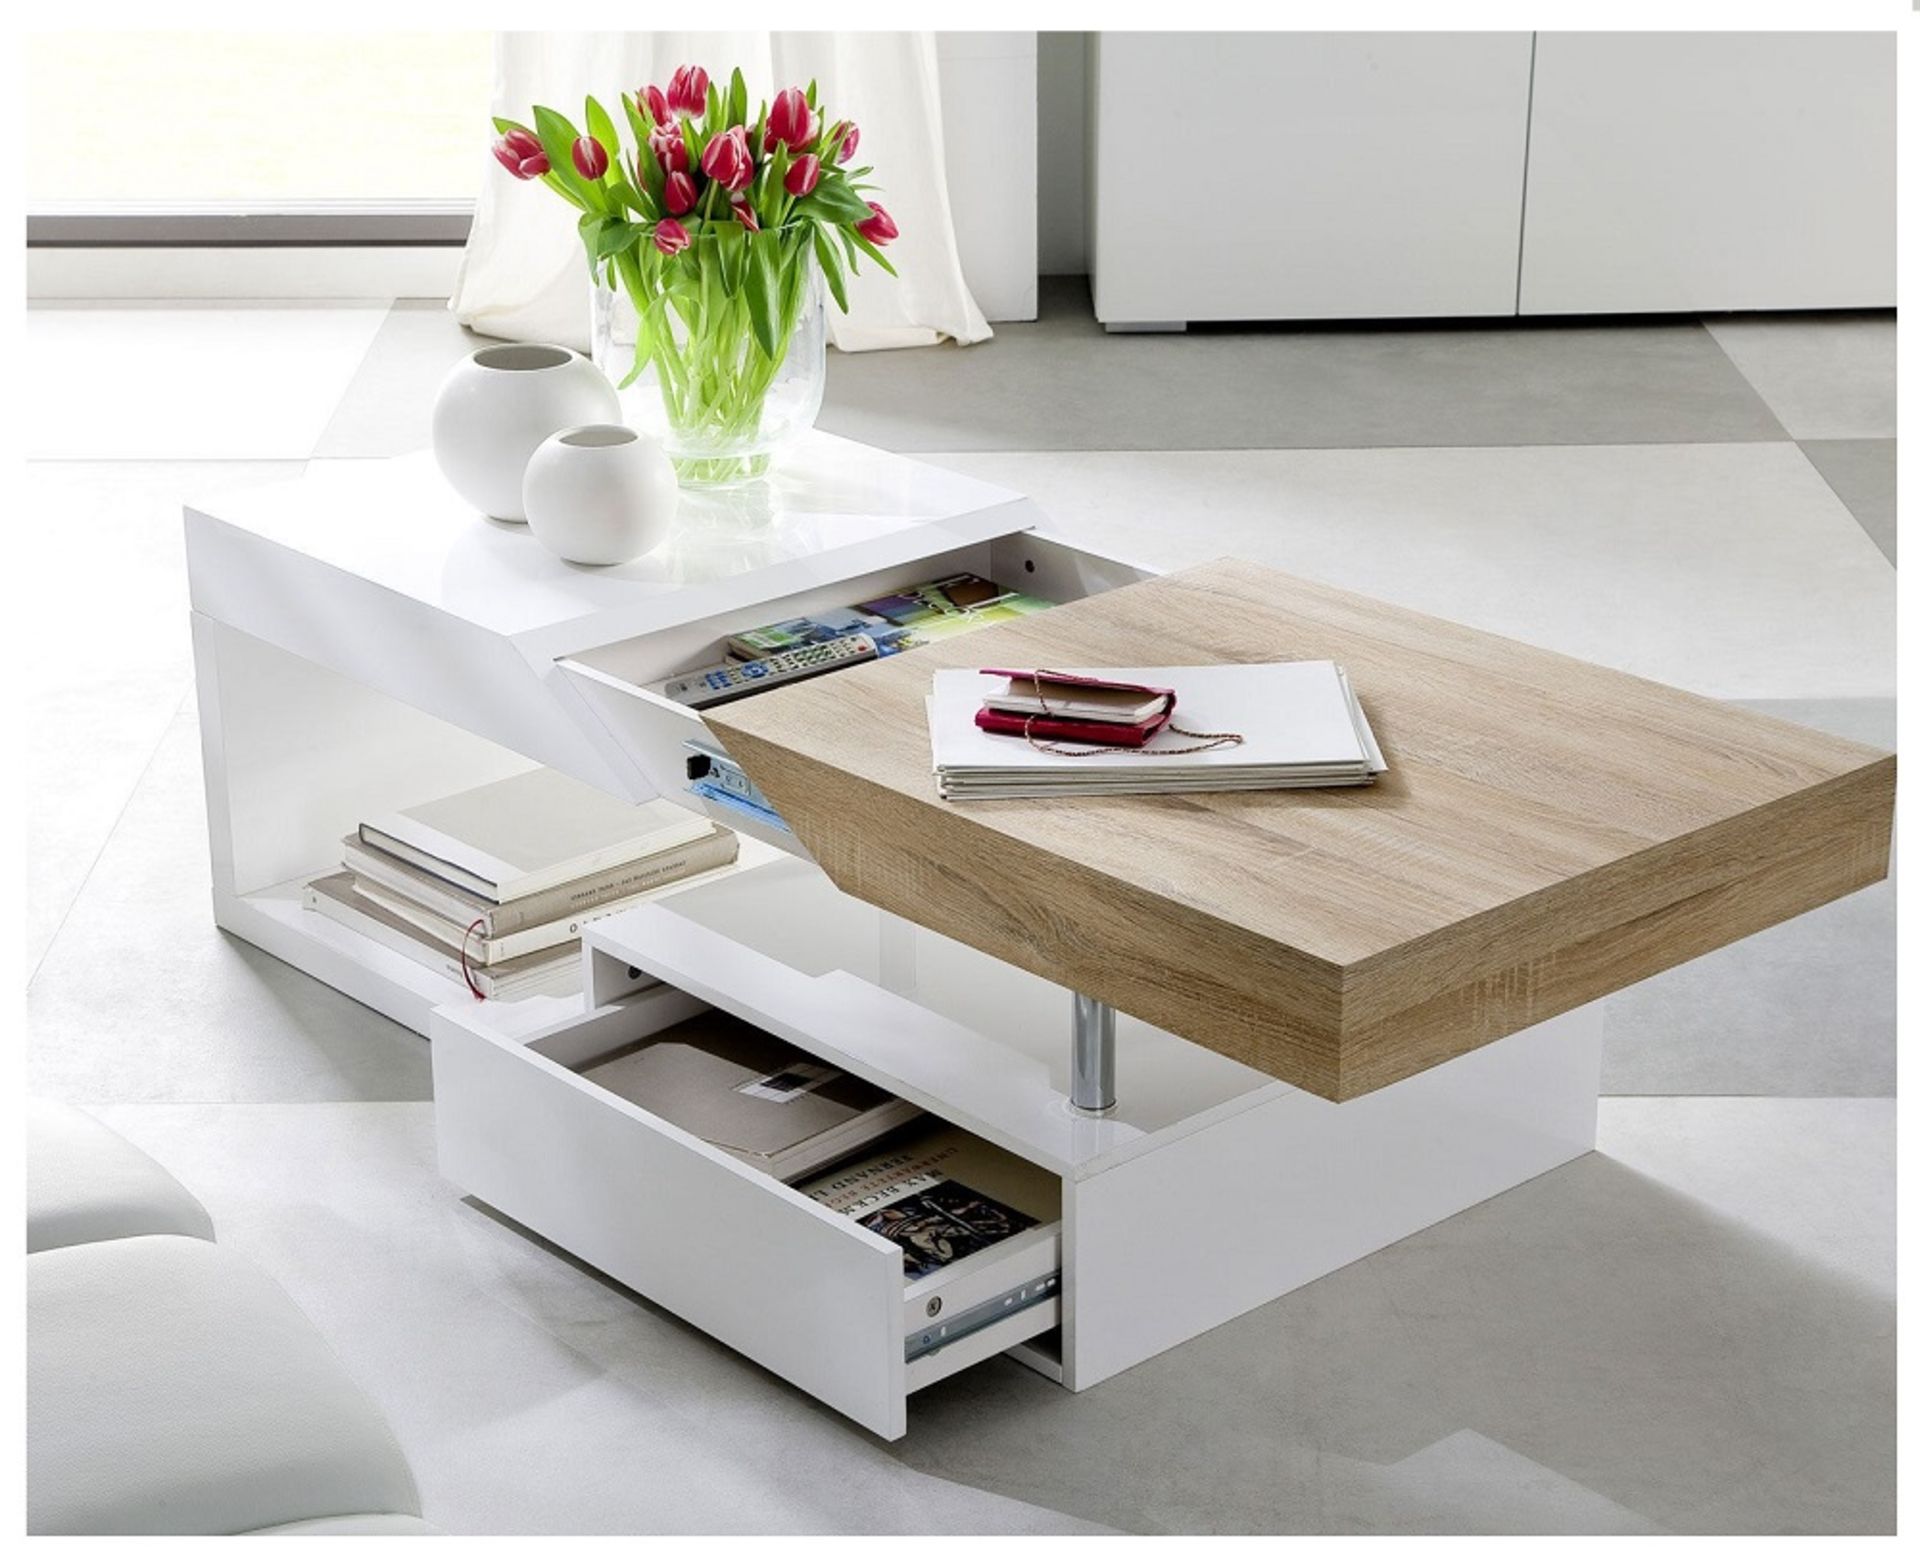 Brand New Wayfair Stock - RRP £319 Callan Coffee Table with Storage Drawer Boxed White Gloss and Oak